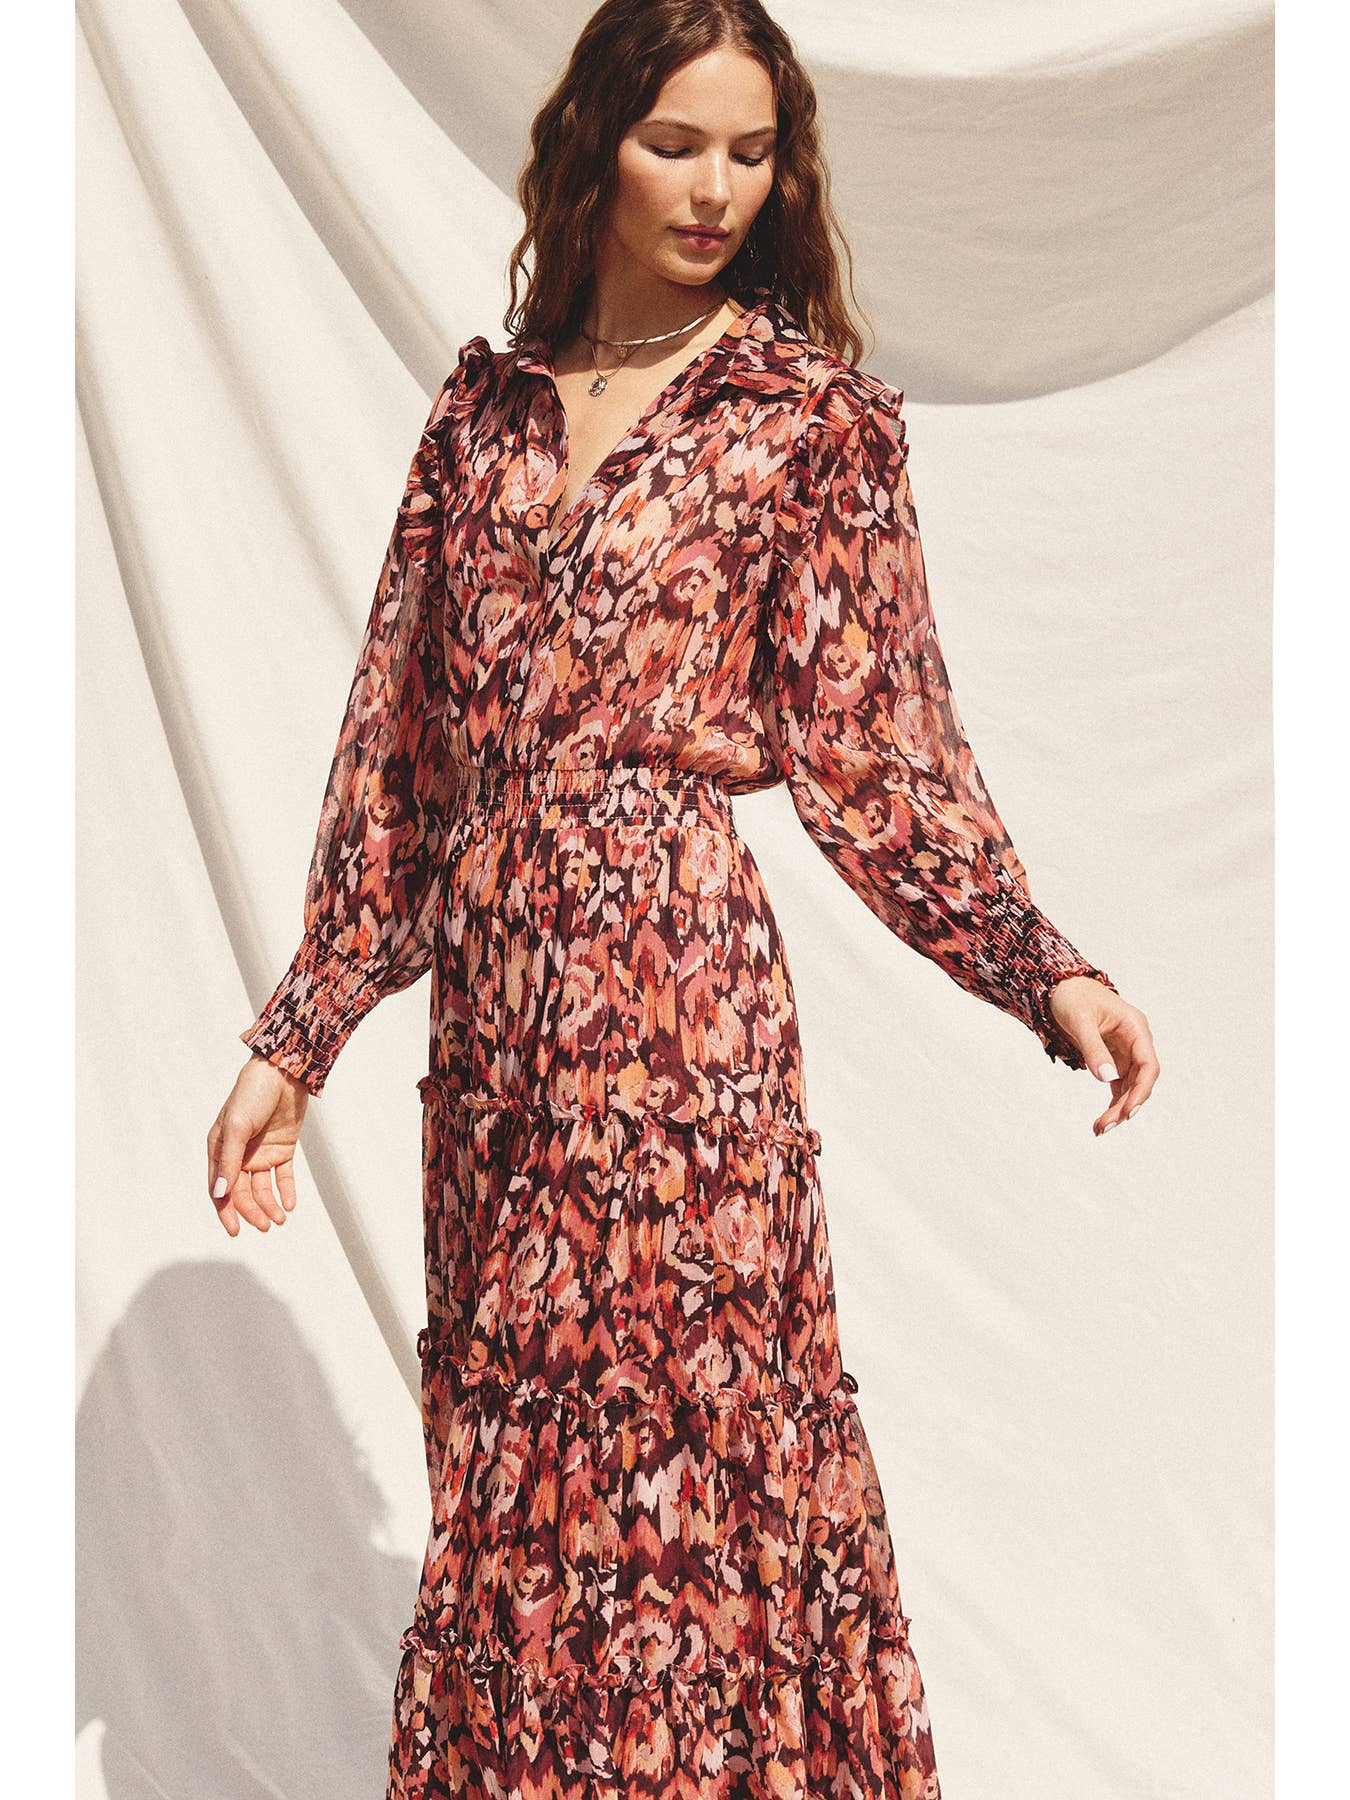 Floral Printed Long Sleeve Maxi Dress, REBELRY BOUTIQUE, Arvada, CO